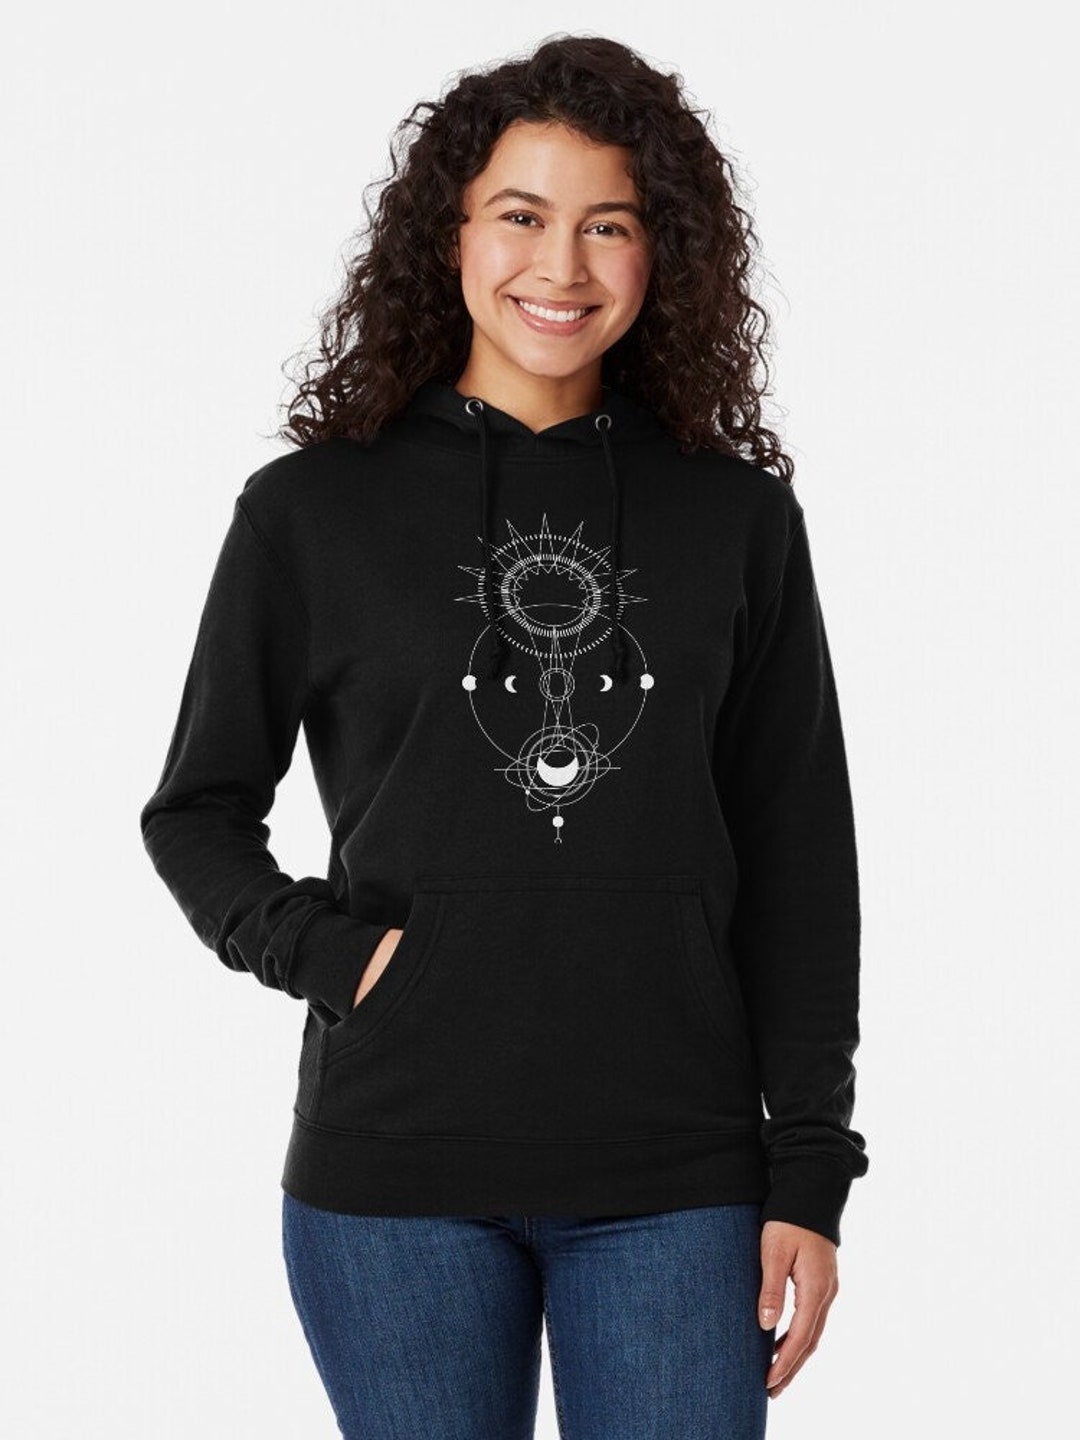 The Eclipse Hoodie Bts for Gift Girl Bts Sweatshirt Ayan - Etsy